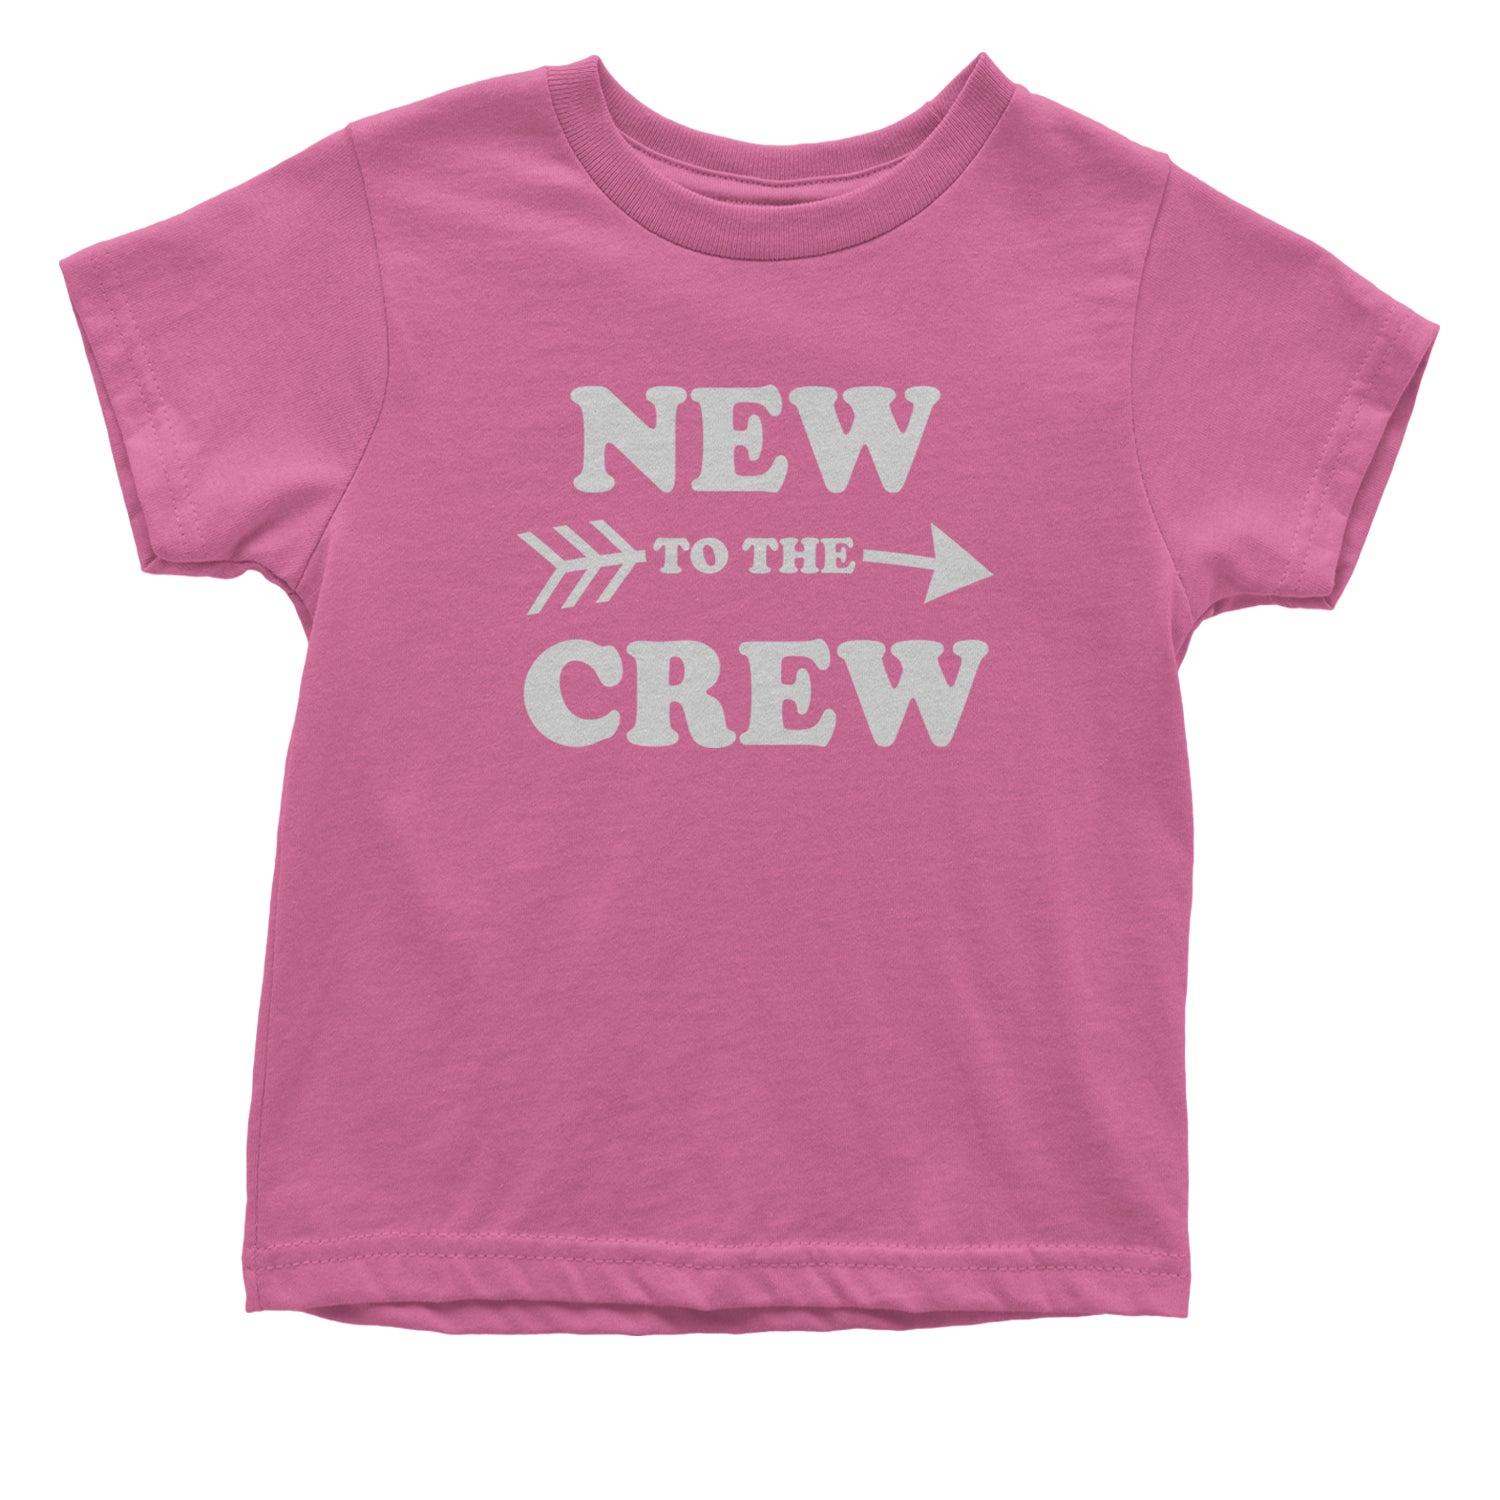 New To The Crew Infant One-Piece Romper Bodysuit and Toddler T-shirt announcement, baby, cousin, gender, newborn, reveal, toddler by Expression Tees